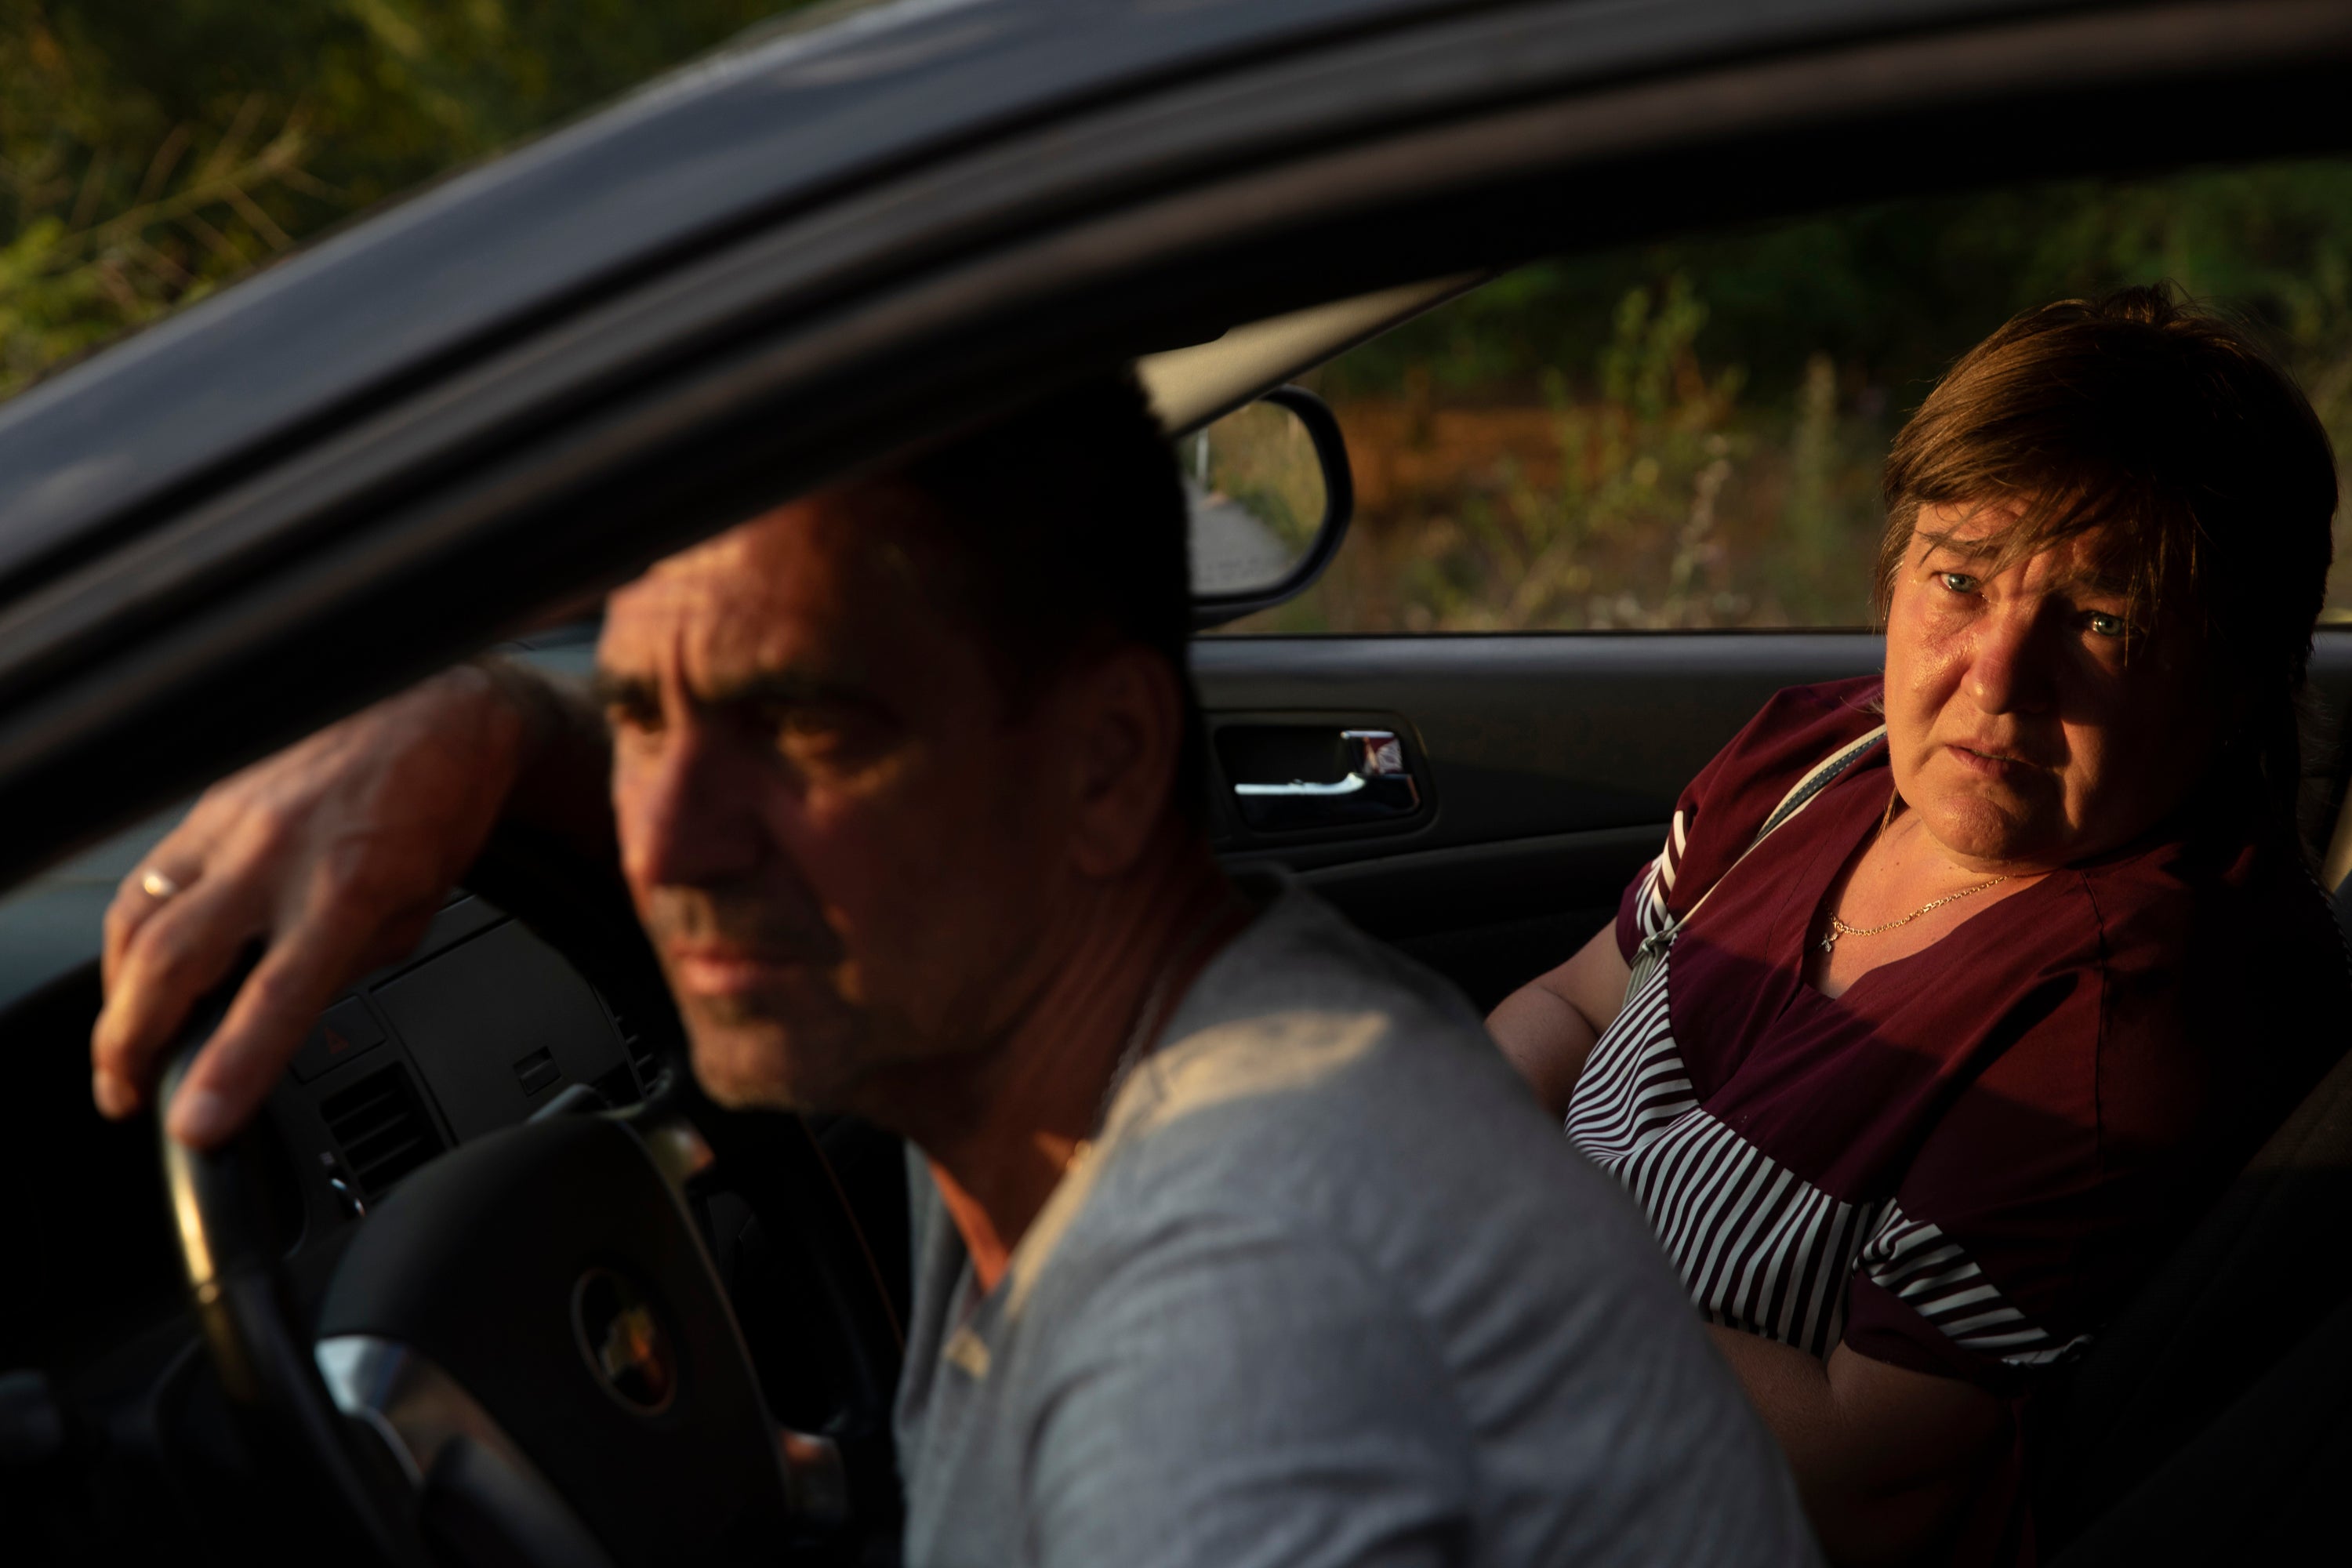 Svitlana, 53, who worked at the Zaporizhzhia nuclear power plant, with husband Oleksandr, 56, wait in a convoy arriving in Ukrainian-held territory